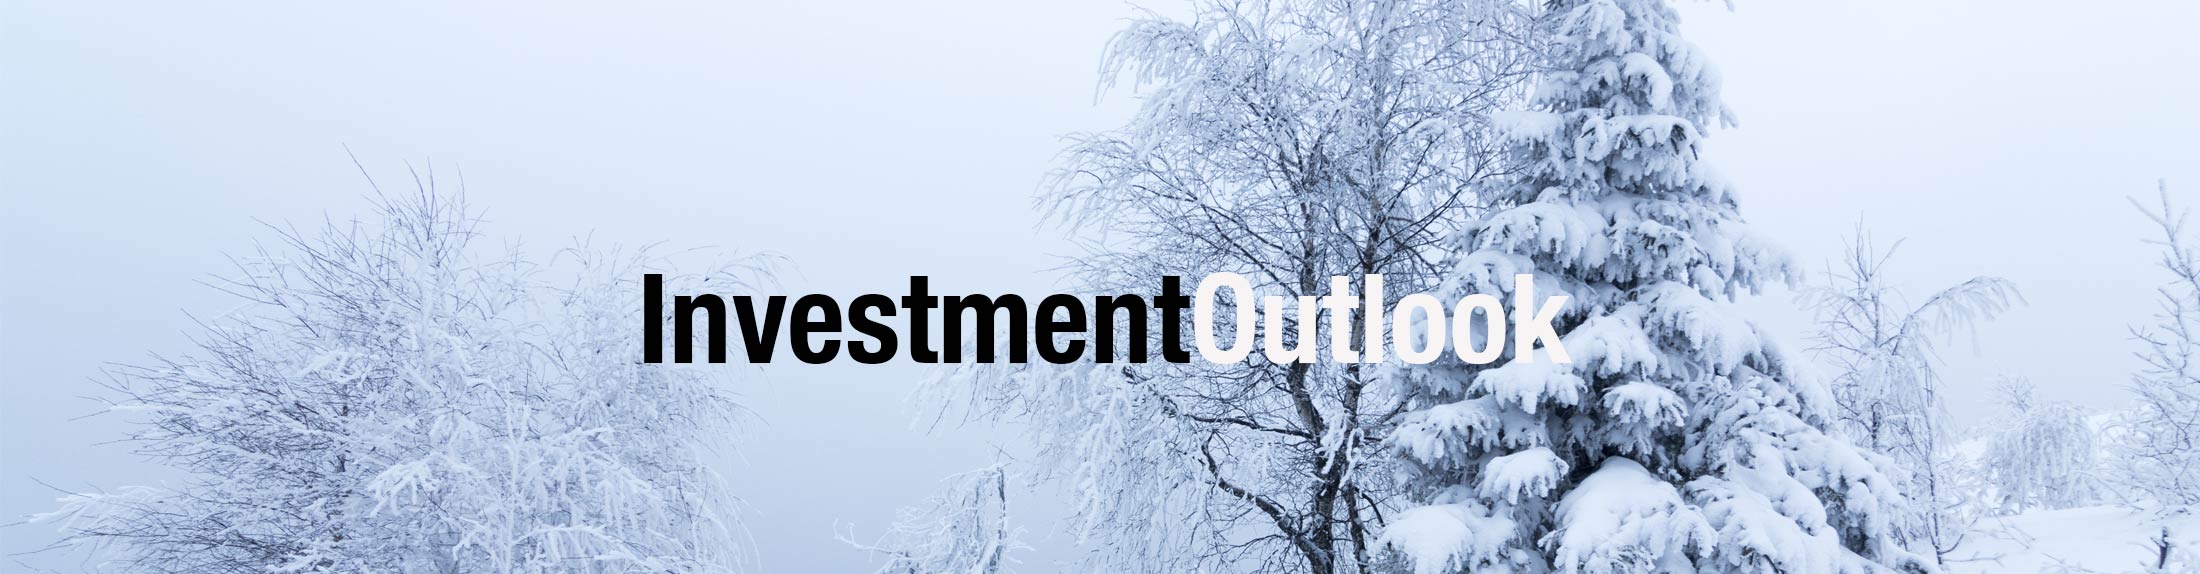 Investment Outlook by Kelley Wright | IQ Trends